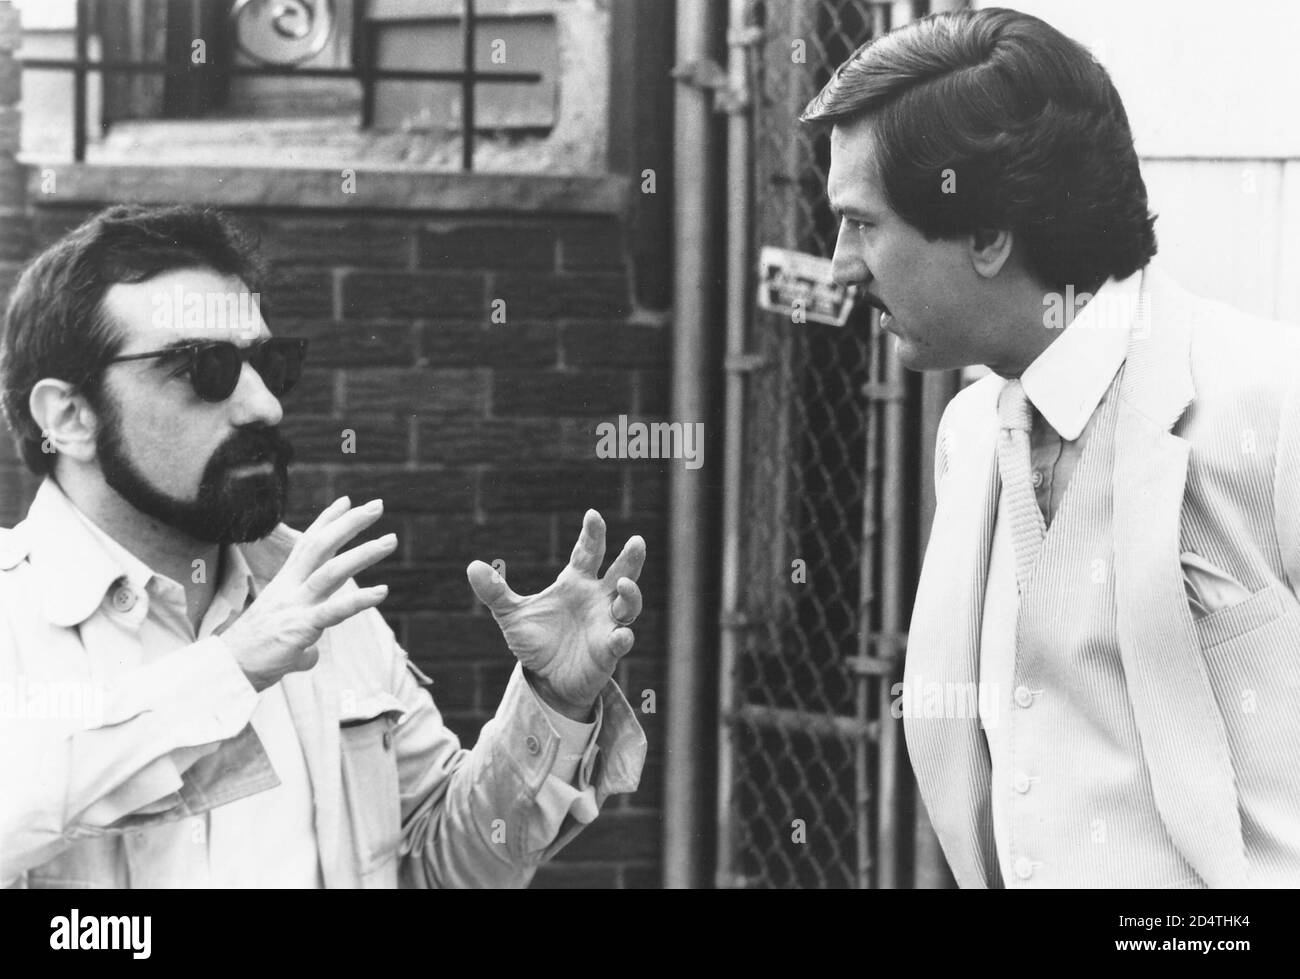 MARTIN SCORSESE and ROBERT DE NIRO in THE KING OF COMEDY (1982), directed by MARTIN SCORSESE. Copyright: Editorial use only. No merchandising or book covers. This is a publicly distributed handout. Access rights only, no license of copyright provided. Only to be reproduced in conjunction with promotion of this film. Credit: 20TH CENTURY FOX / Album Stock Photo